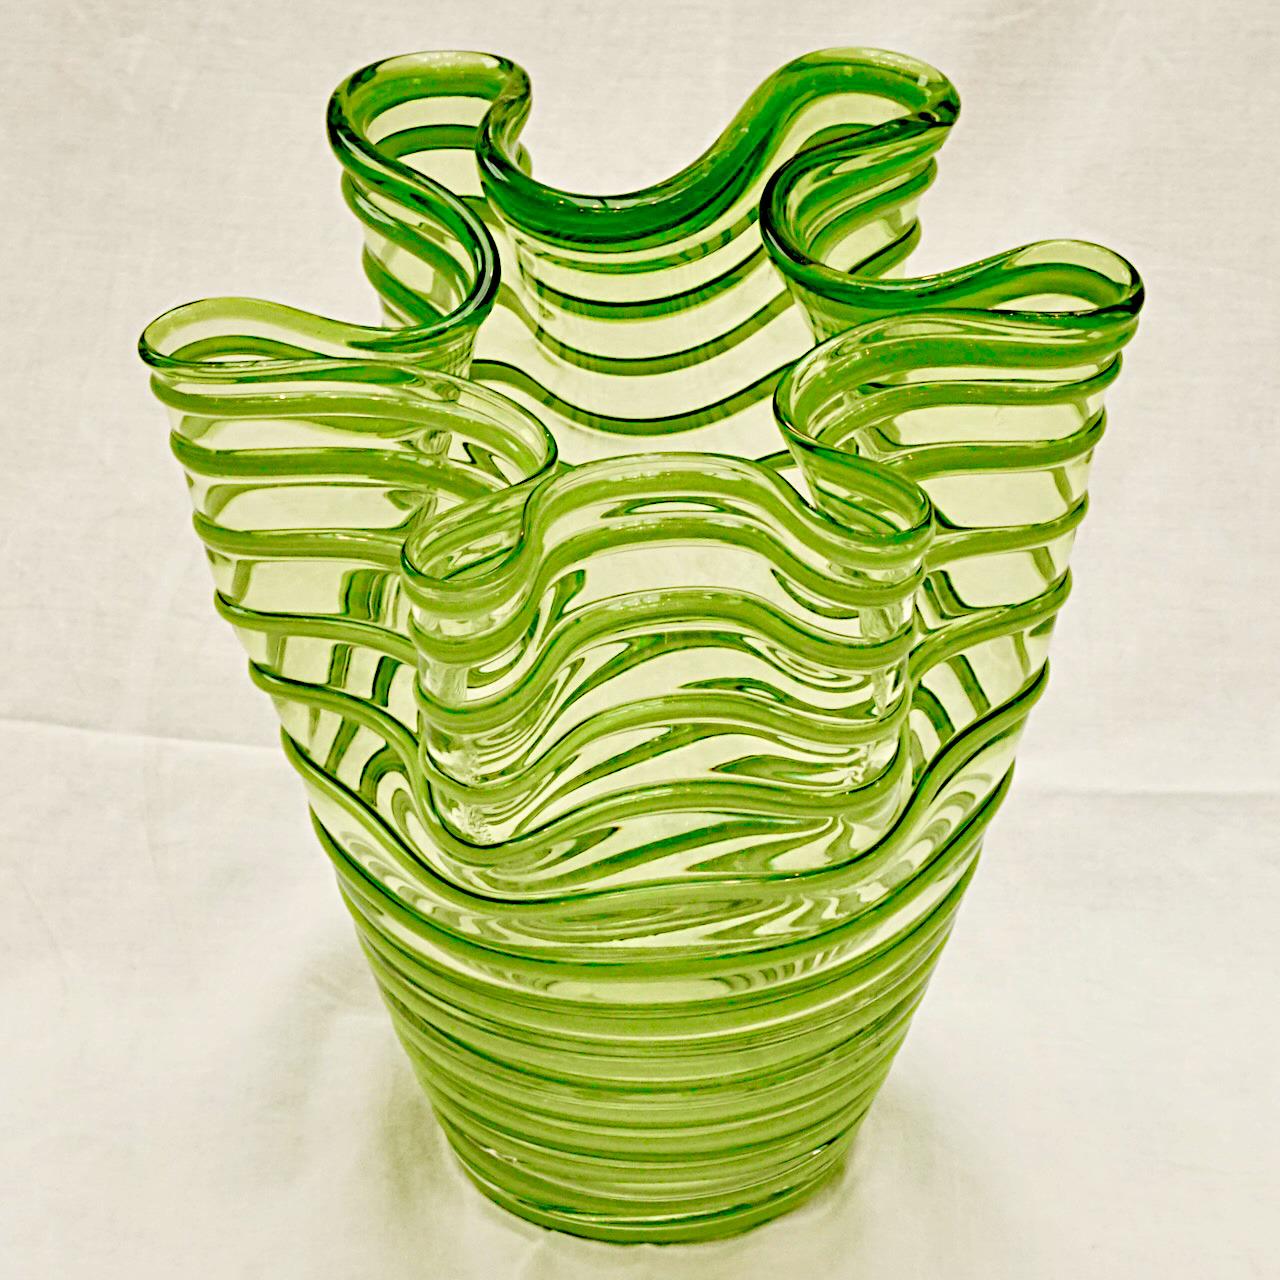 Heavy hand made striped art glass handkerchief vase, in a beautiful green on green colourway. The vase has a lovely folded organic shape. It is in very good condition. Measuring diameter 20cm / 7.87 inches and height 23.5 cm / 9.25 inches.

This